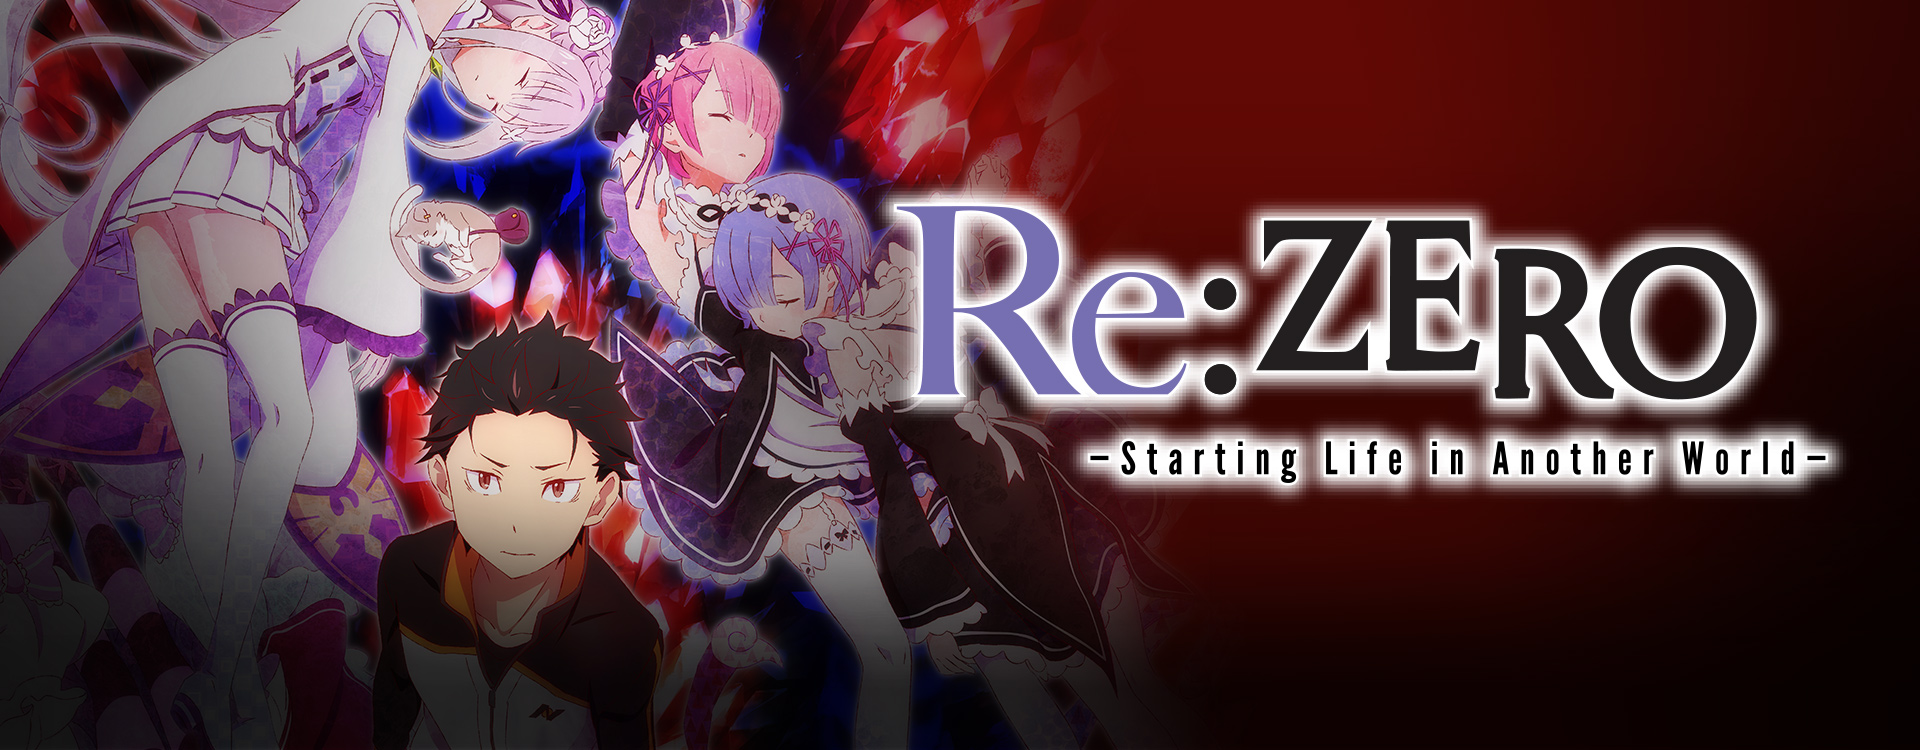 Watch Re Zero Starting Life In Another World Sub Dub Drama Fantasy Psychological Anime Funimation